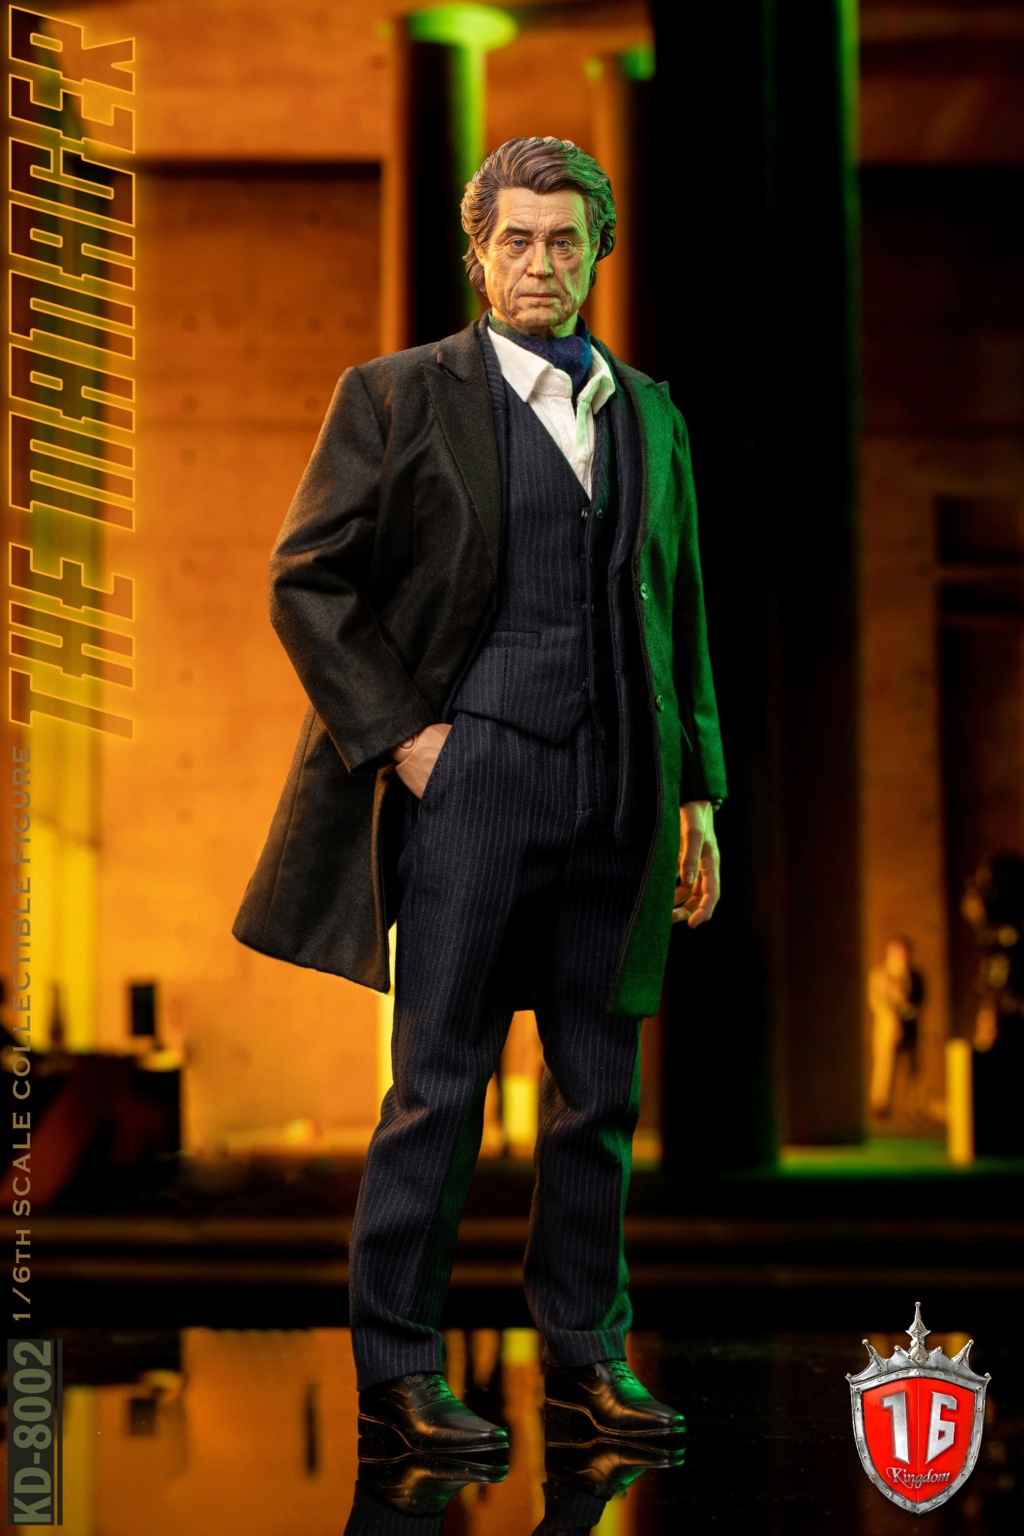 newproduct - NEW PRODUCT: Kingdom: 1/6 The Manager Winston Action Figure KD-8002 11433810